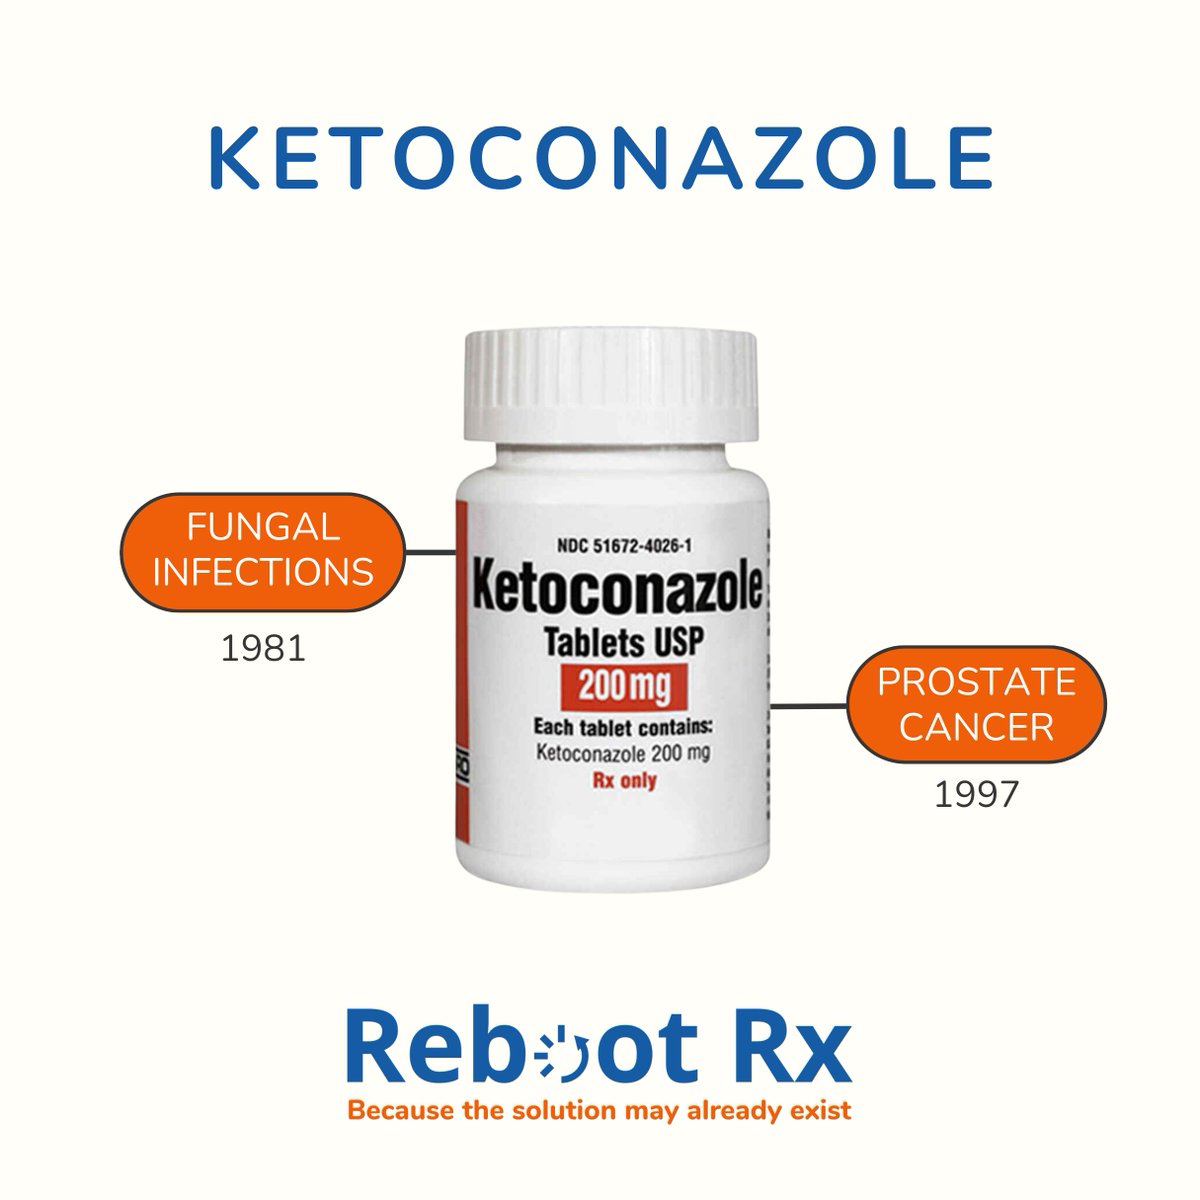 Ketoconazole was repurposed for #prostatecancer after men treated for fungal infections experienced breast tissue enlargement. Understanding its mechanism of action later inspired the development of abiraterone, a new drug with a more favorable toxicity profile. #drugrepurposing